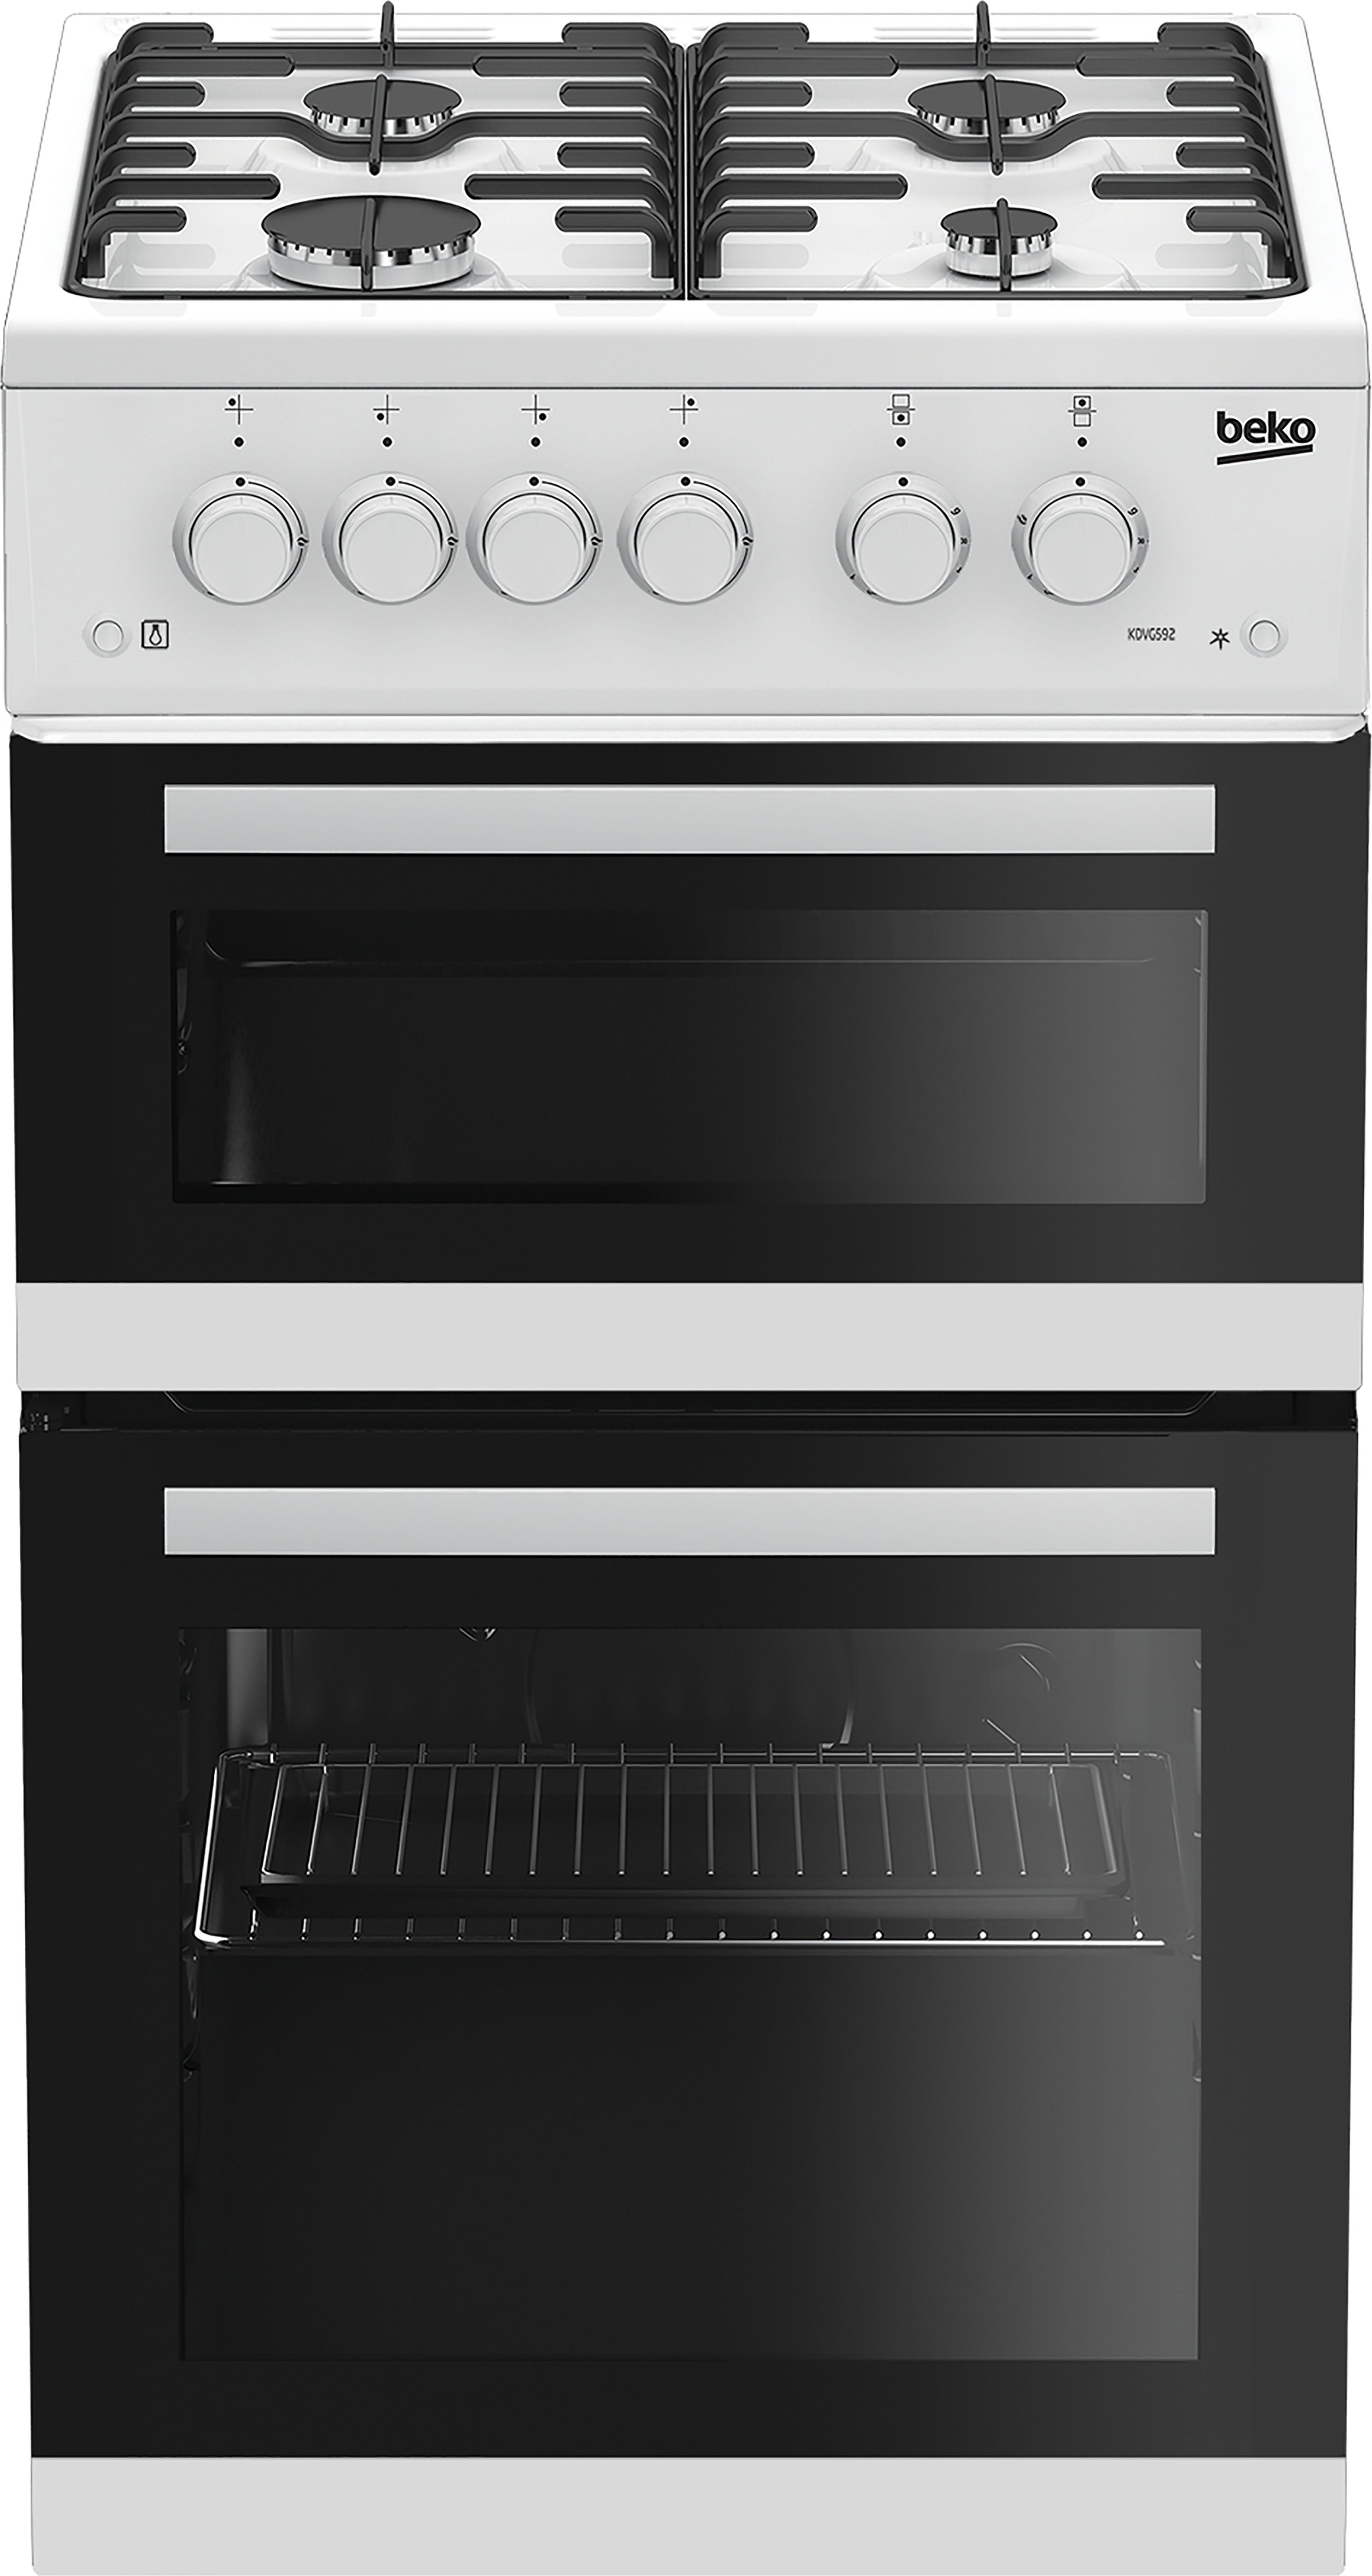 Beko KDVG593W Freestanding Gas Cooker with Gas Grill - White - A+ Rated, White